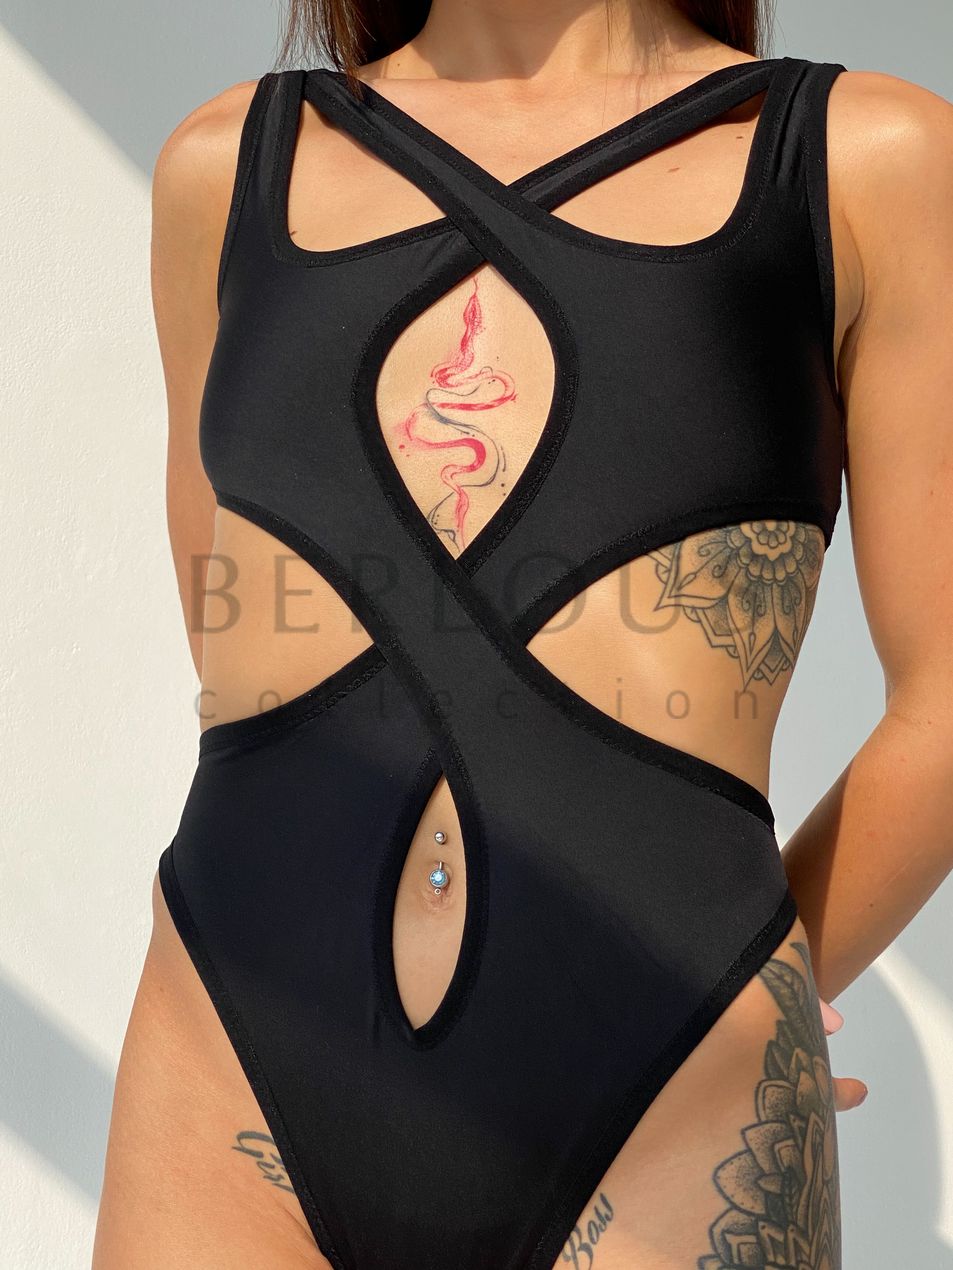 BODYSUIT, collection SOFT, Resilient fabric, Black, XS